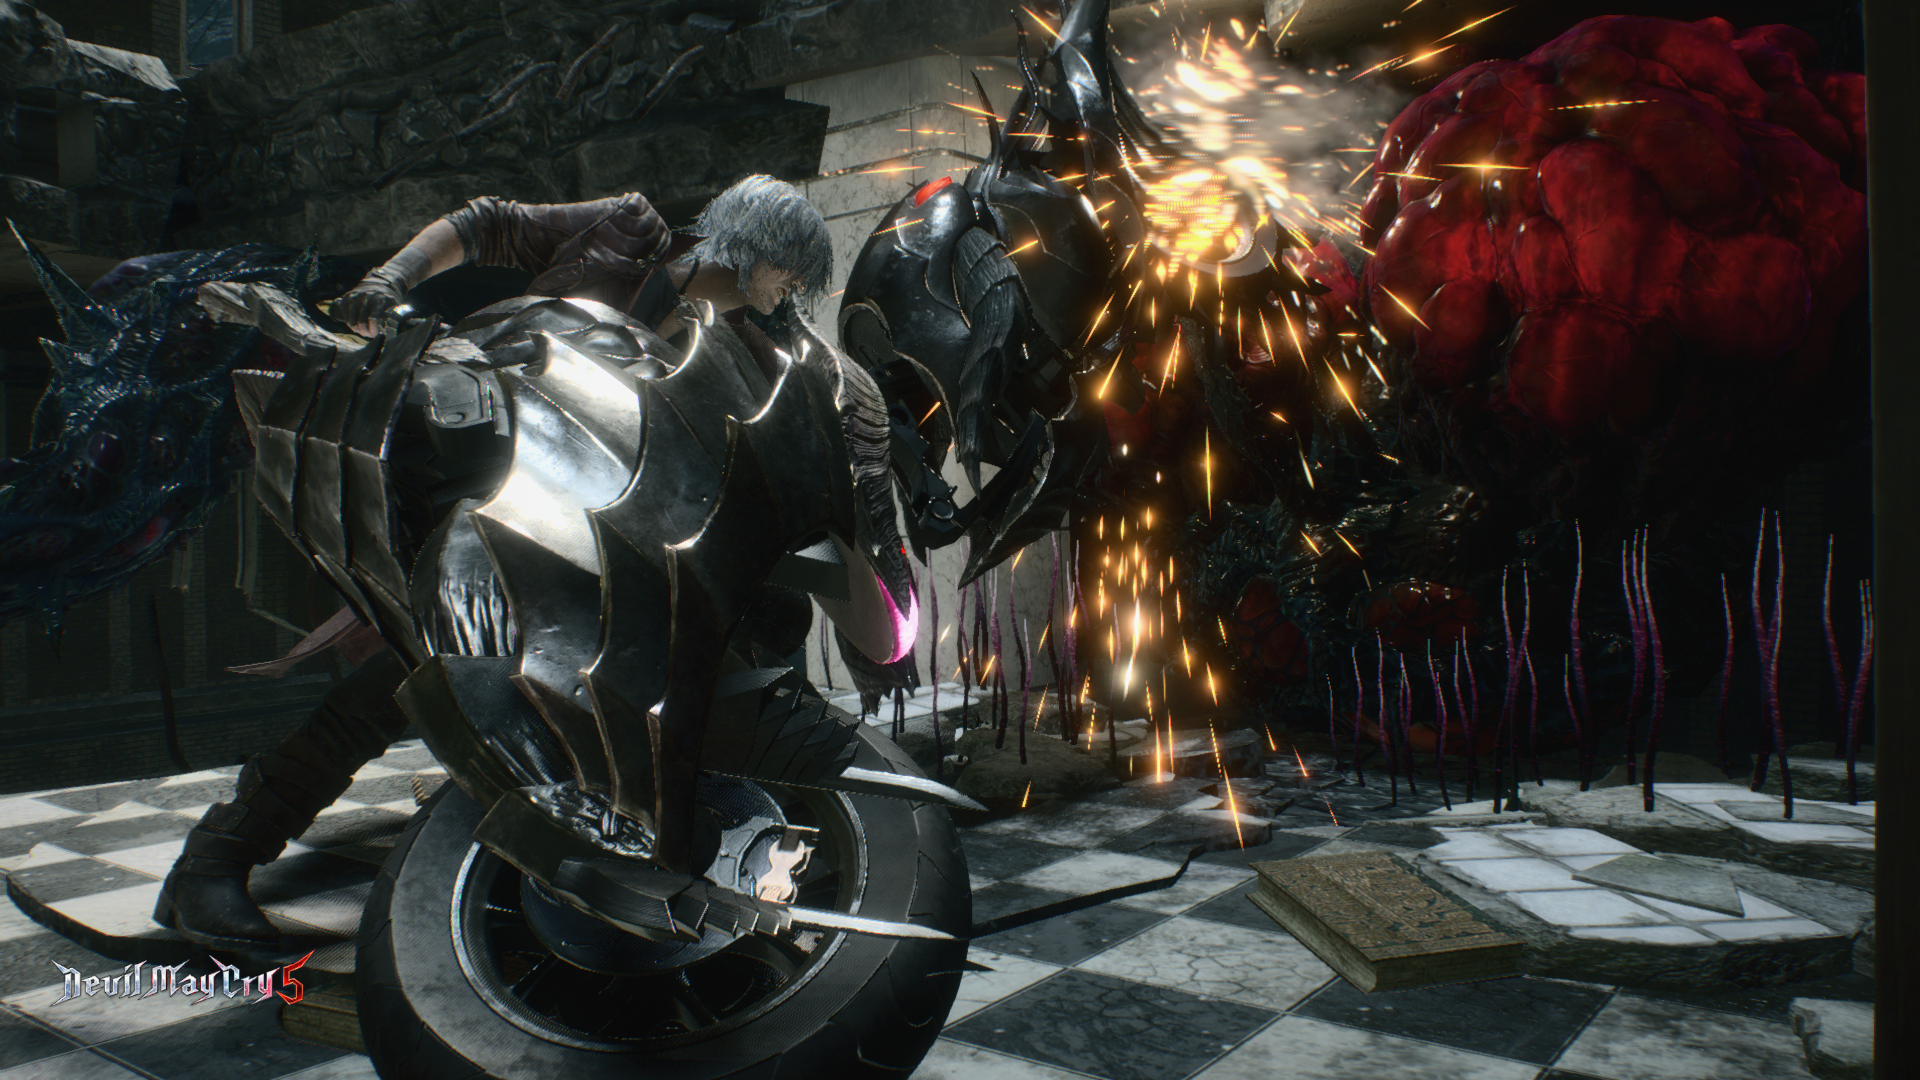 Dante Devil May Cry 5 Hd Wallpaper Background Image 1920x1080